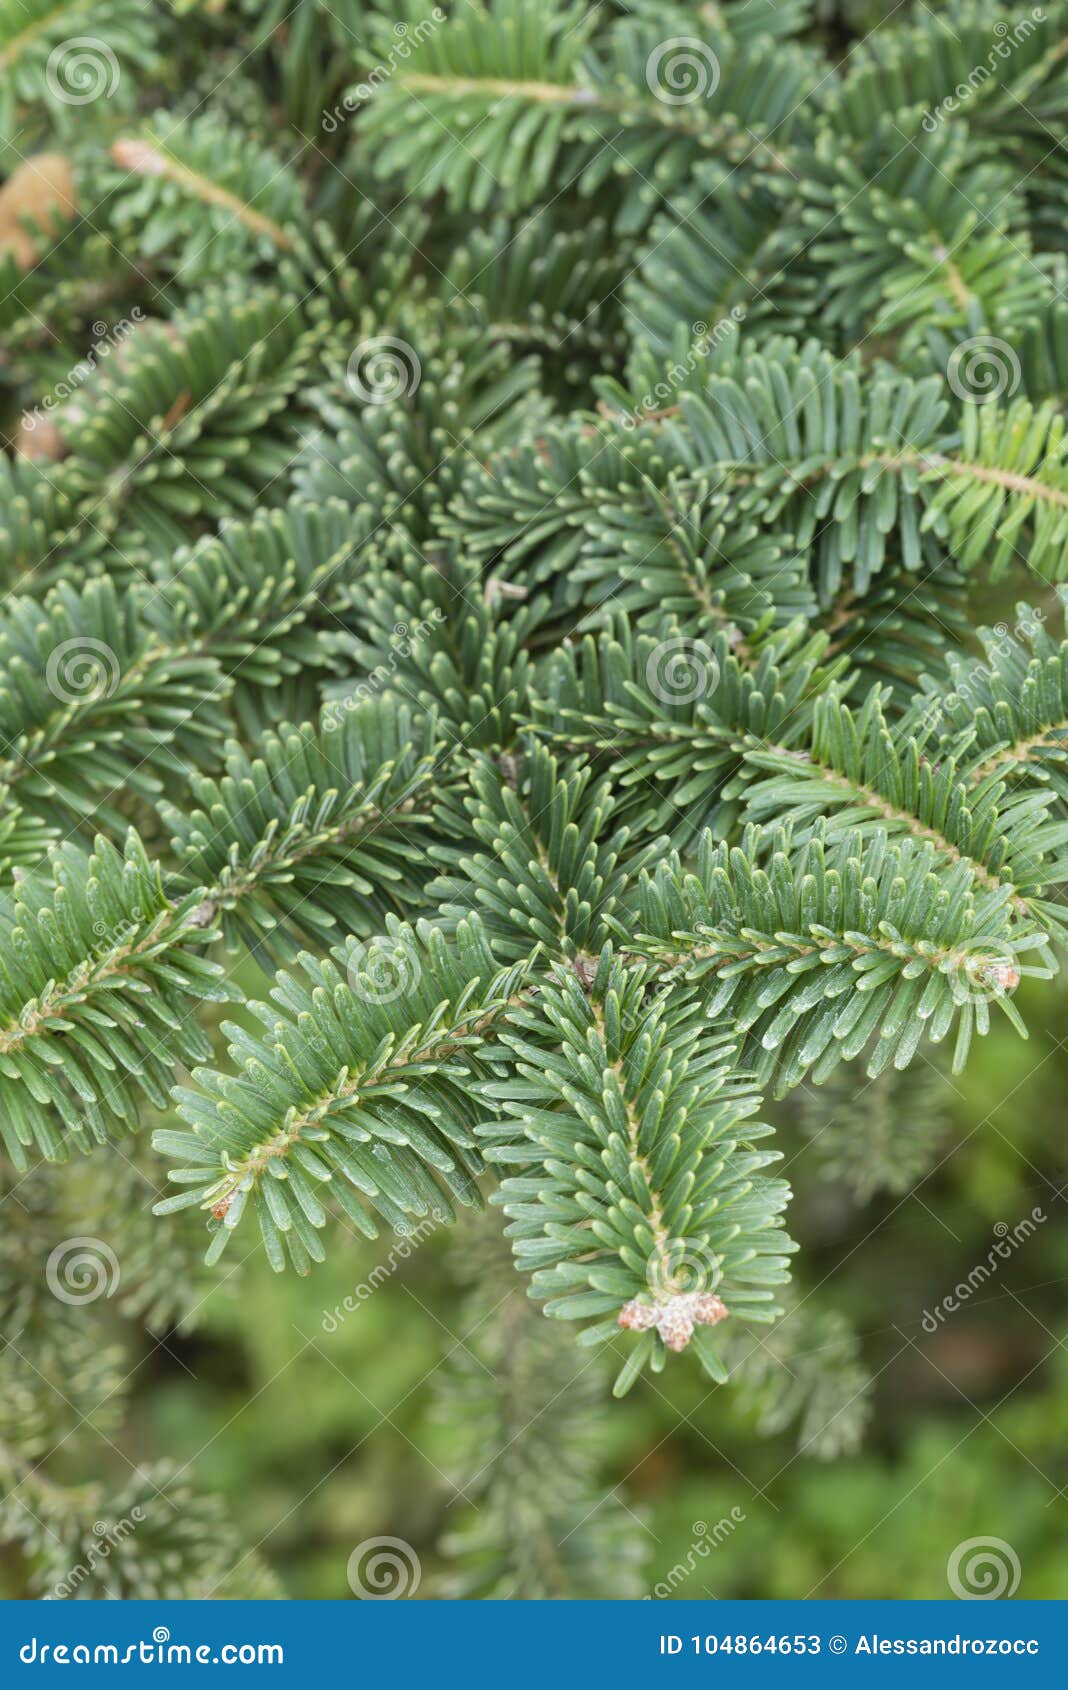 Norway Spruce Tree Detail Stock Image Image Of Nature